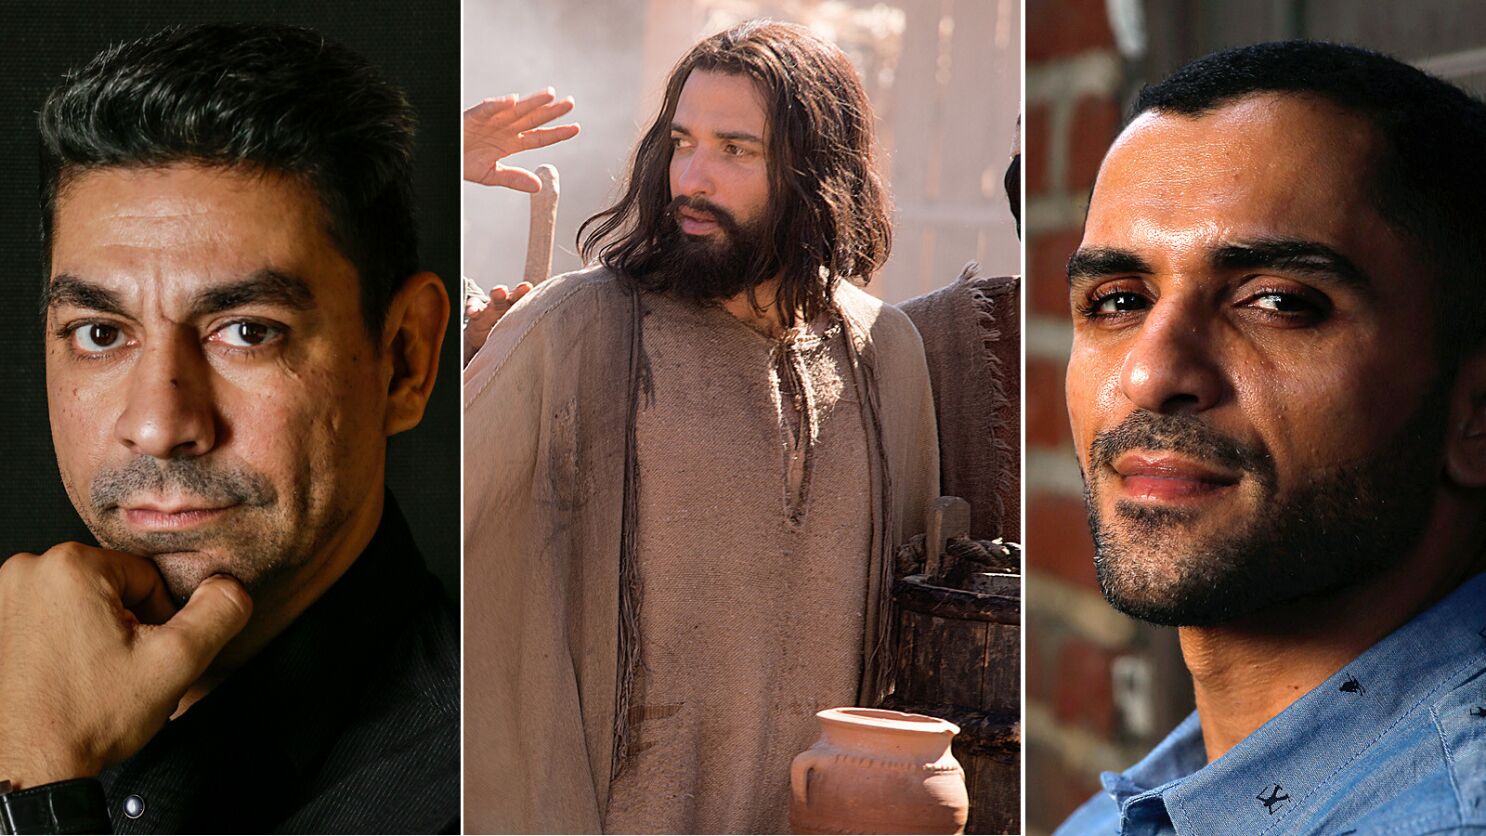 Forget playing Terrorist No. 3. Middle Eastern actors seek roles ...